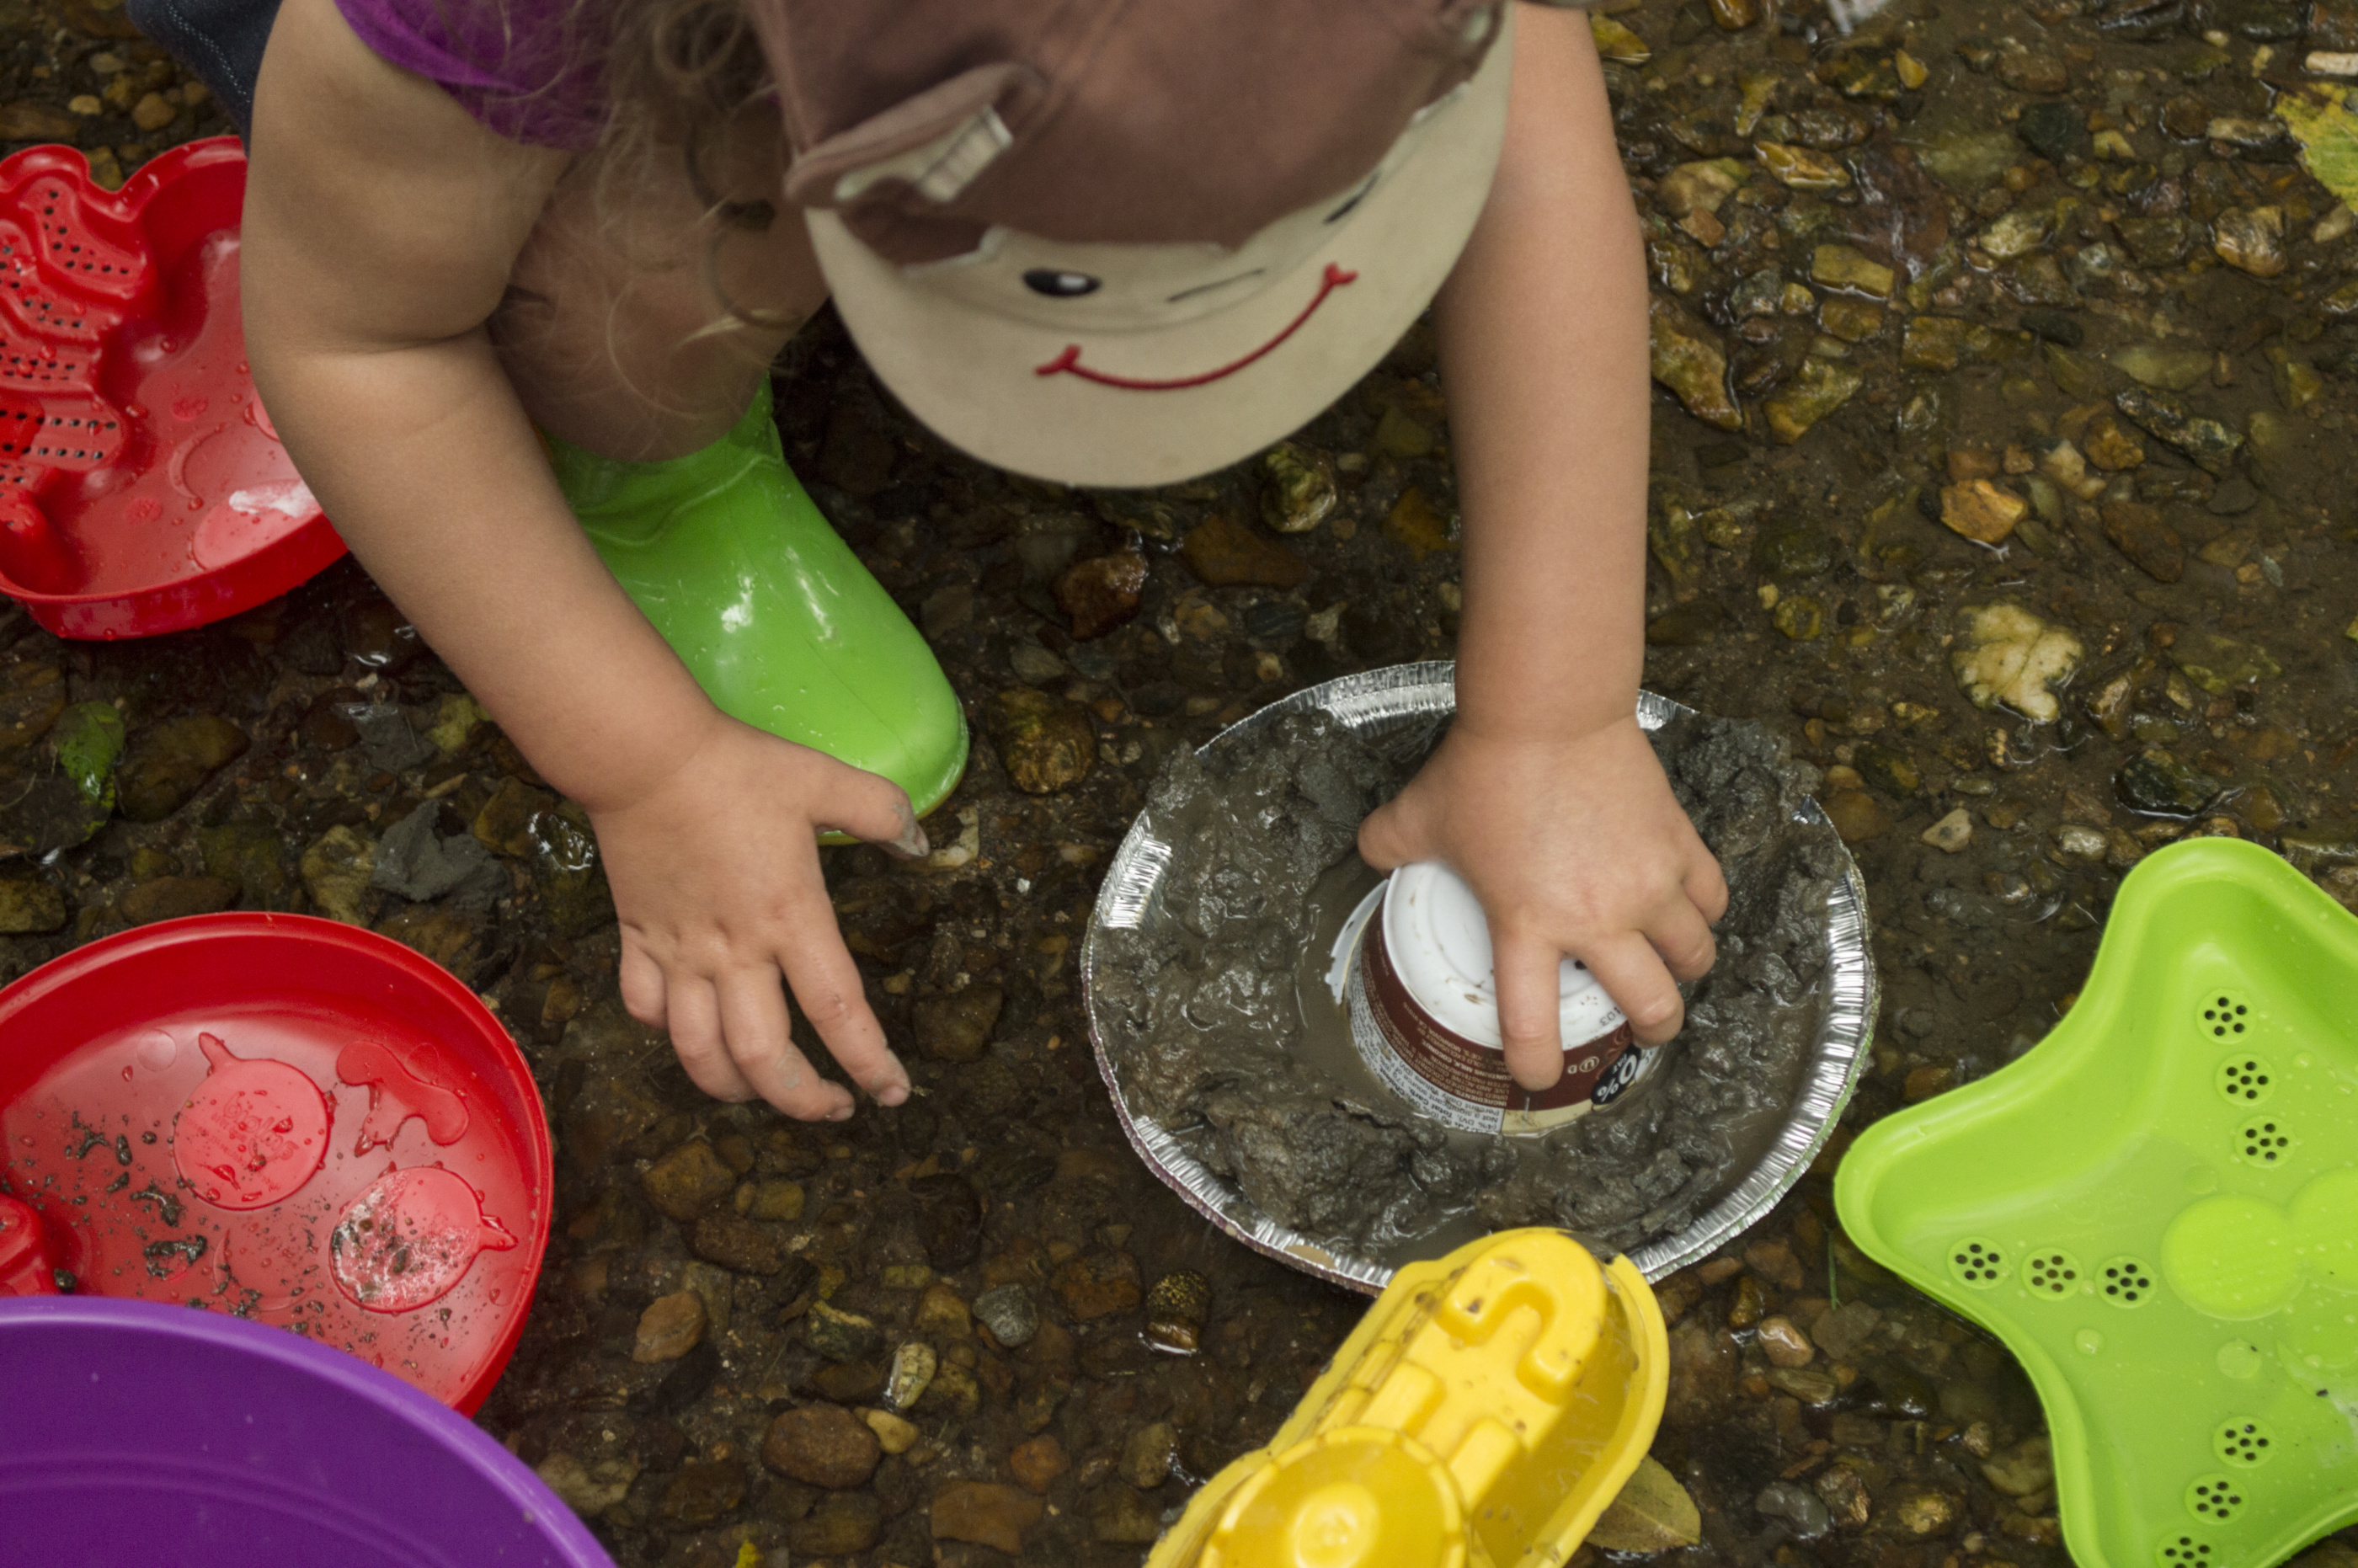 The camera looks down at a child playing in the mud with a plastic cup an tin pie pan.